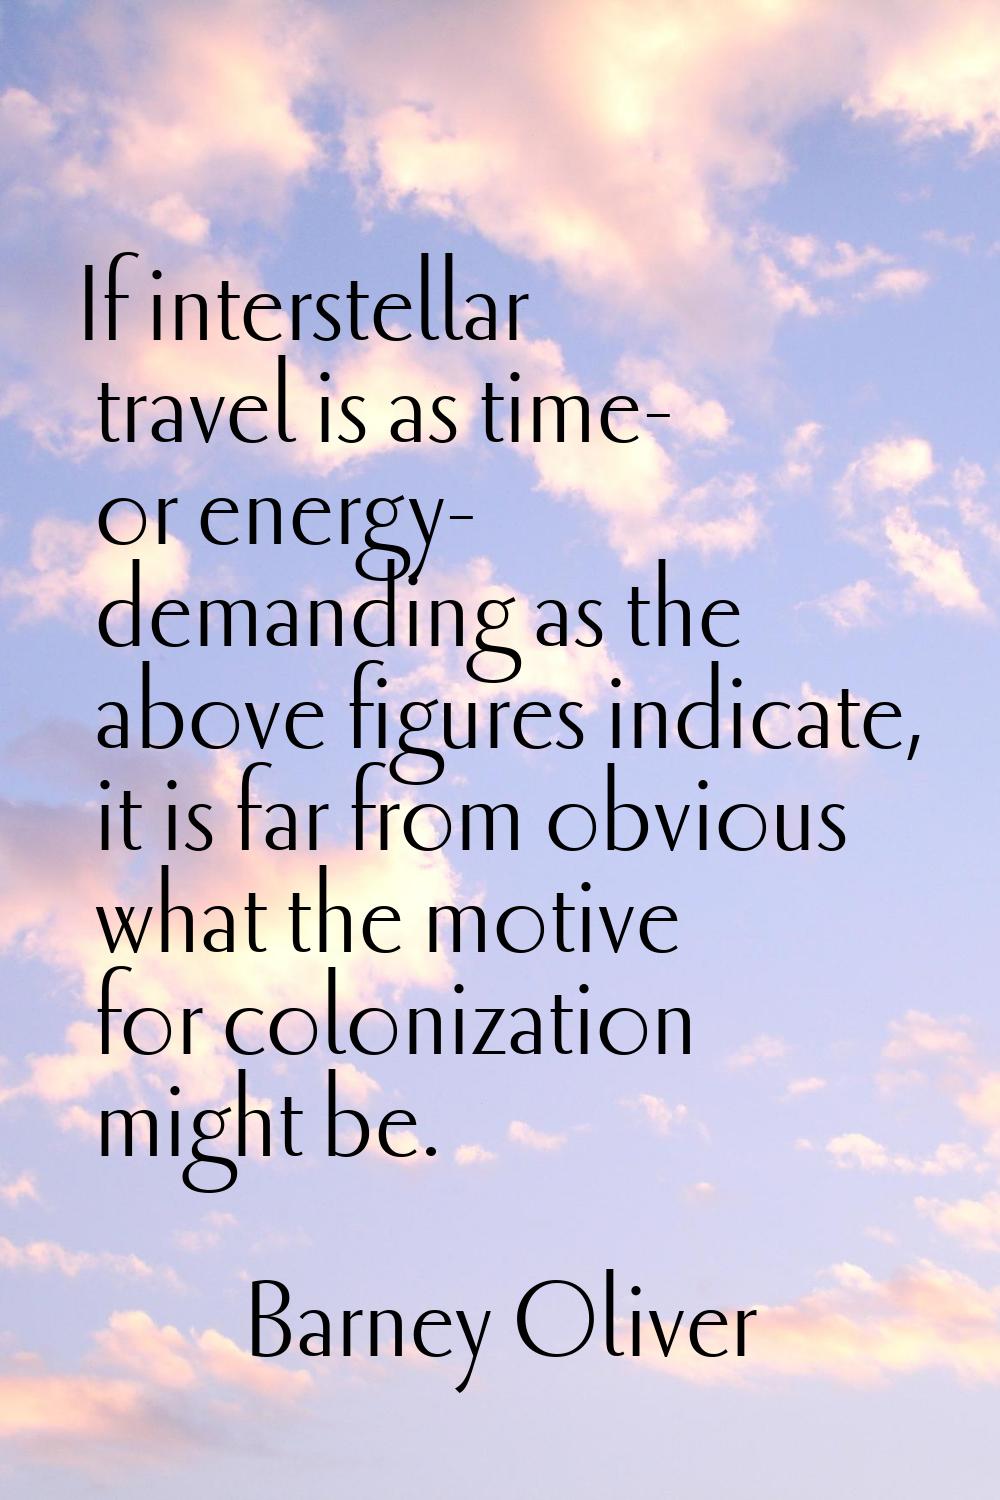 If interstellar travel is as time- or energy- demanding as the above figures indicate, it is far fr